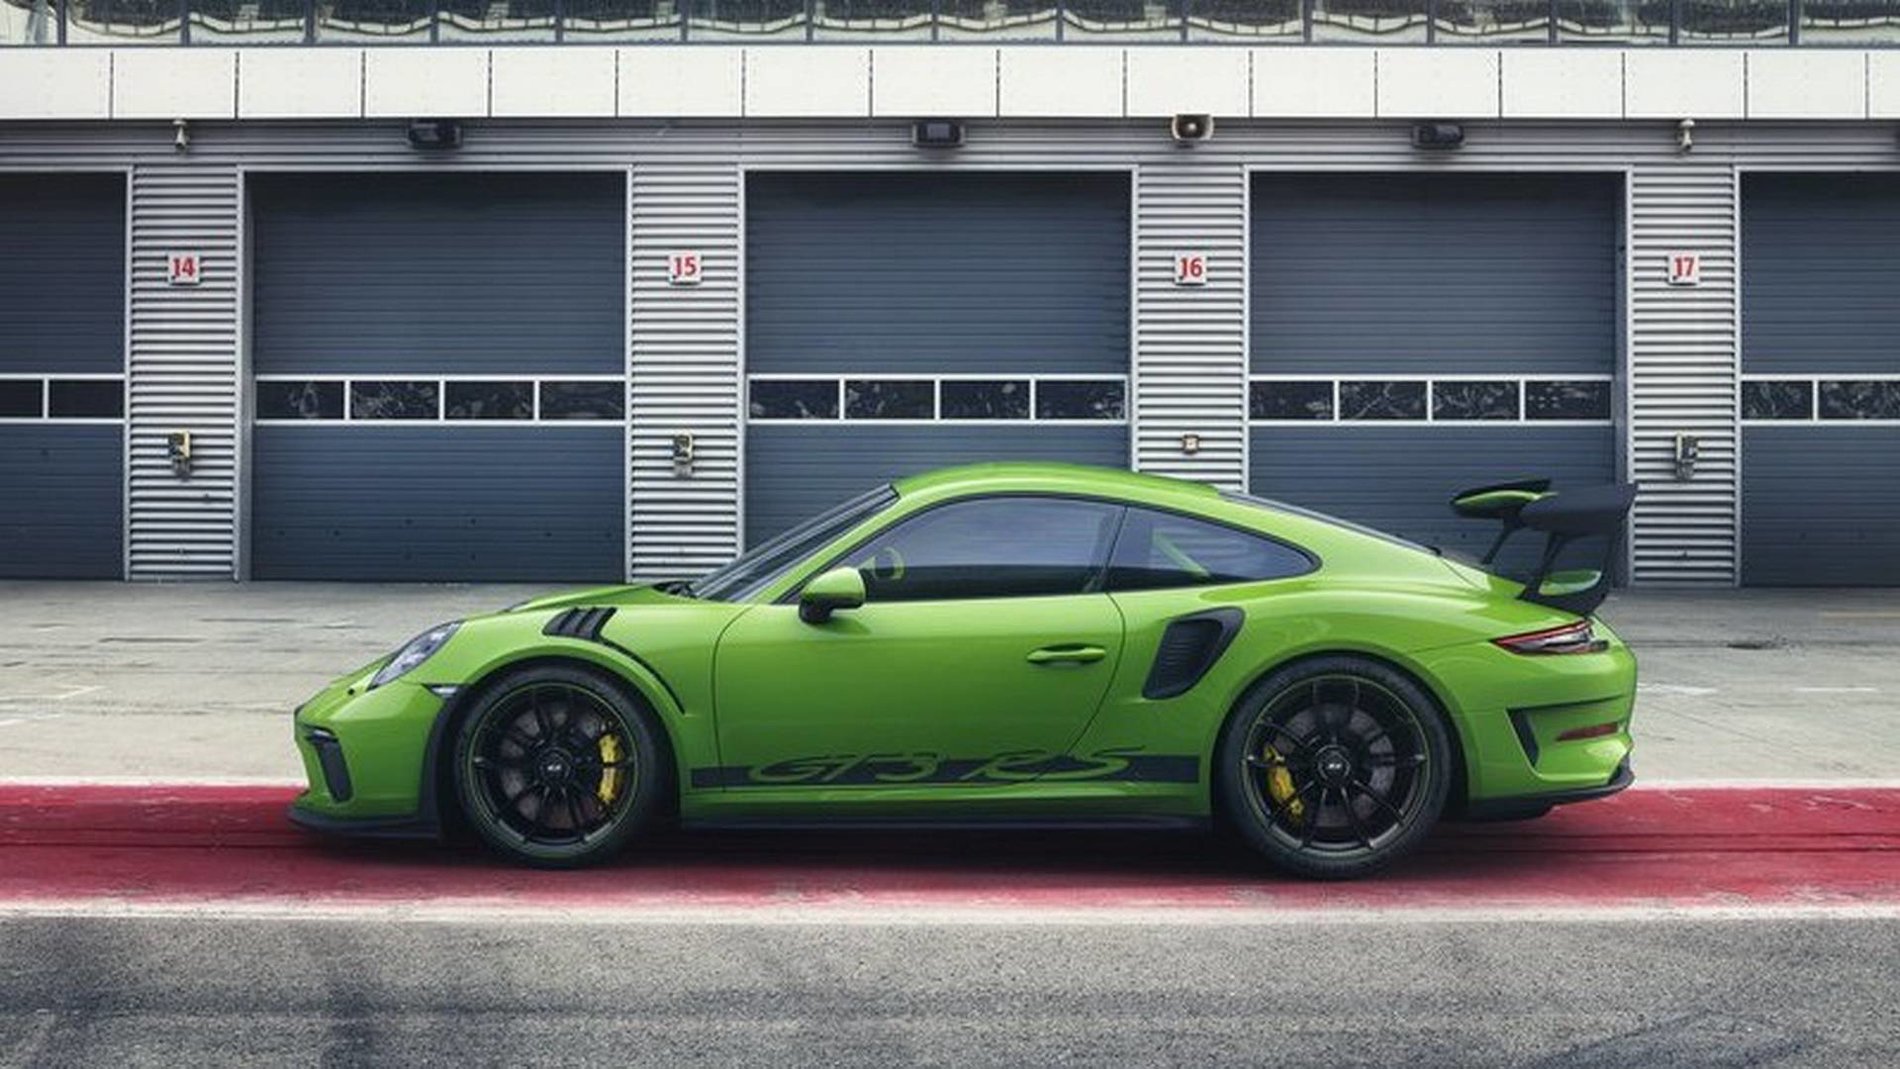 Porsche Taycan Taycan Colors 2019-porsche-911-gt3-rs-facelift-9912-leaked-looks-great-in-mamba-green-123299_1